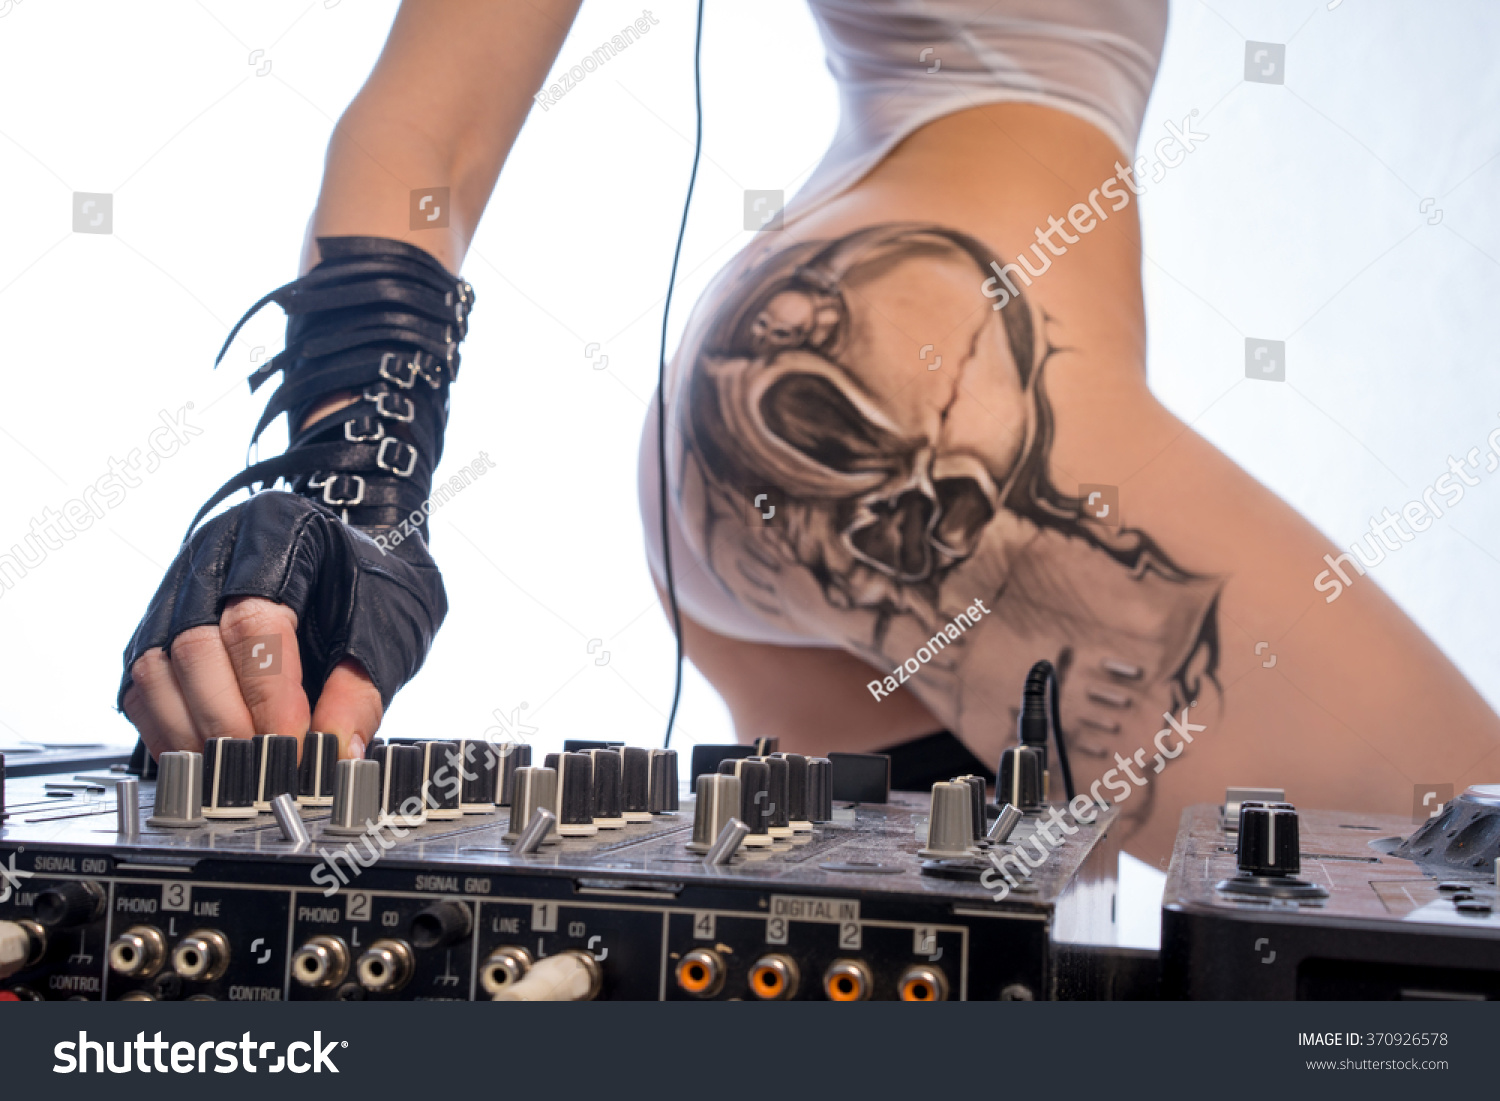 naked girl with dj equipment